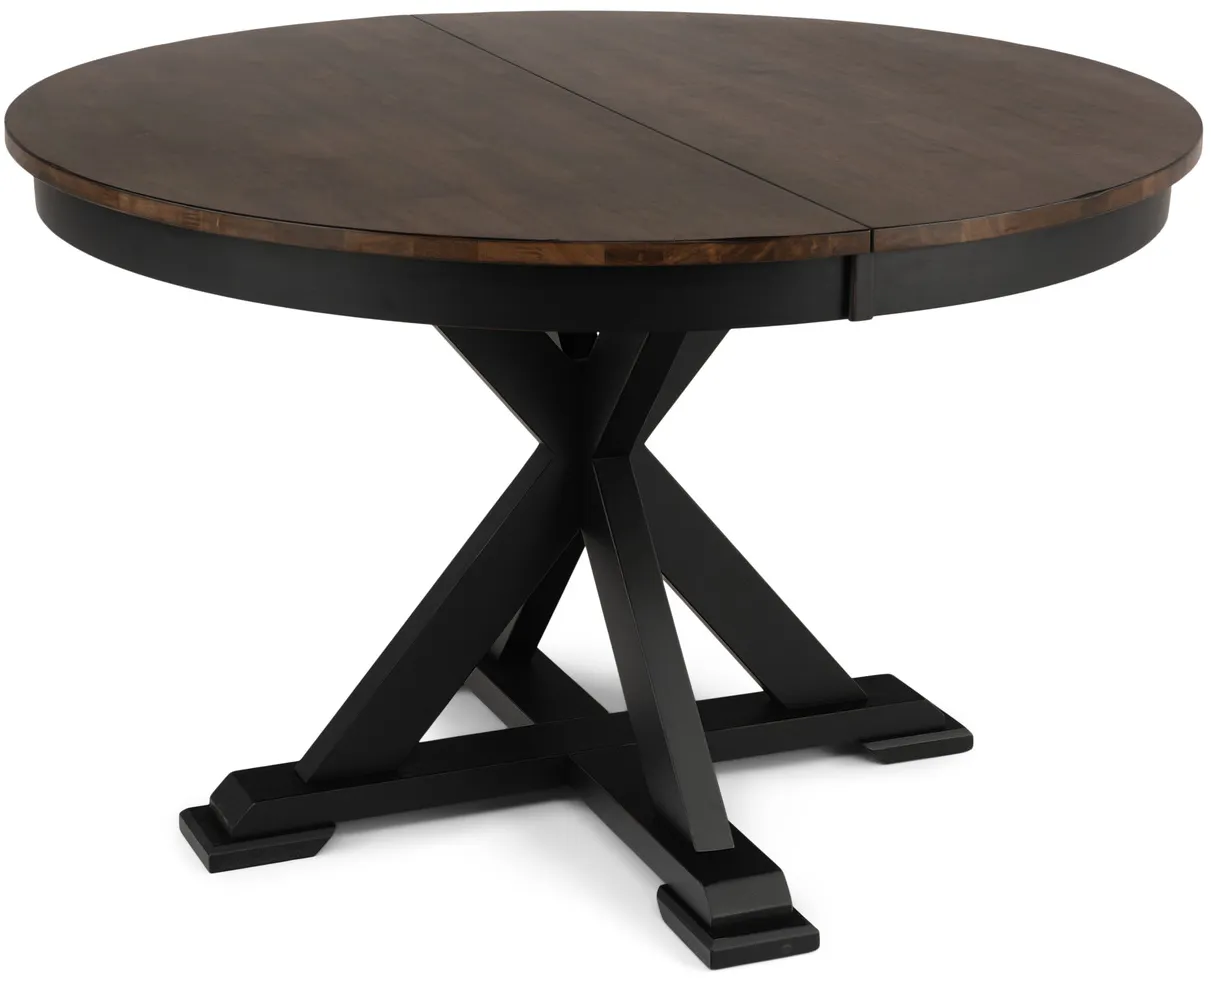 Greeley Square Round Dining Table